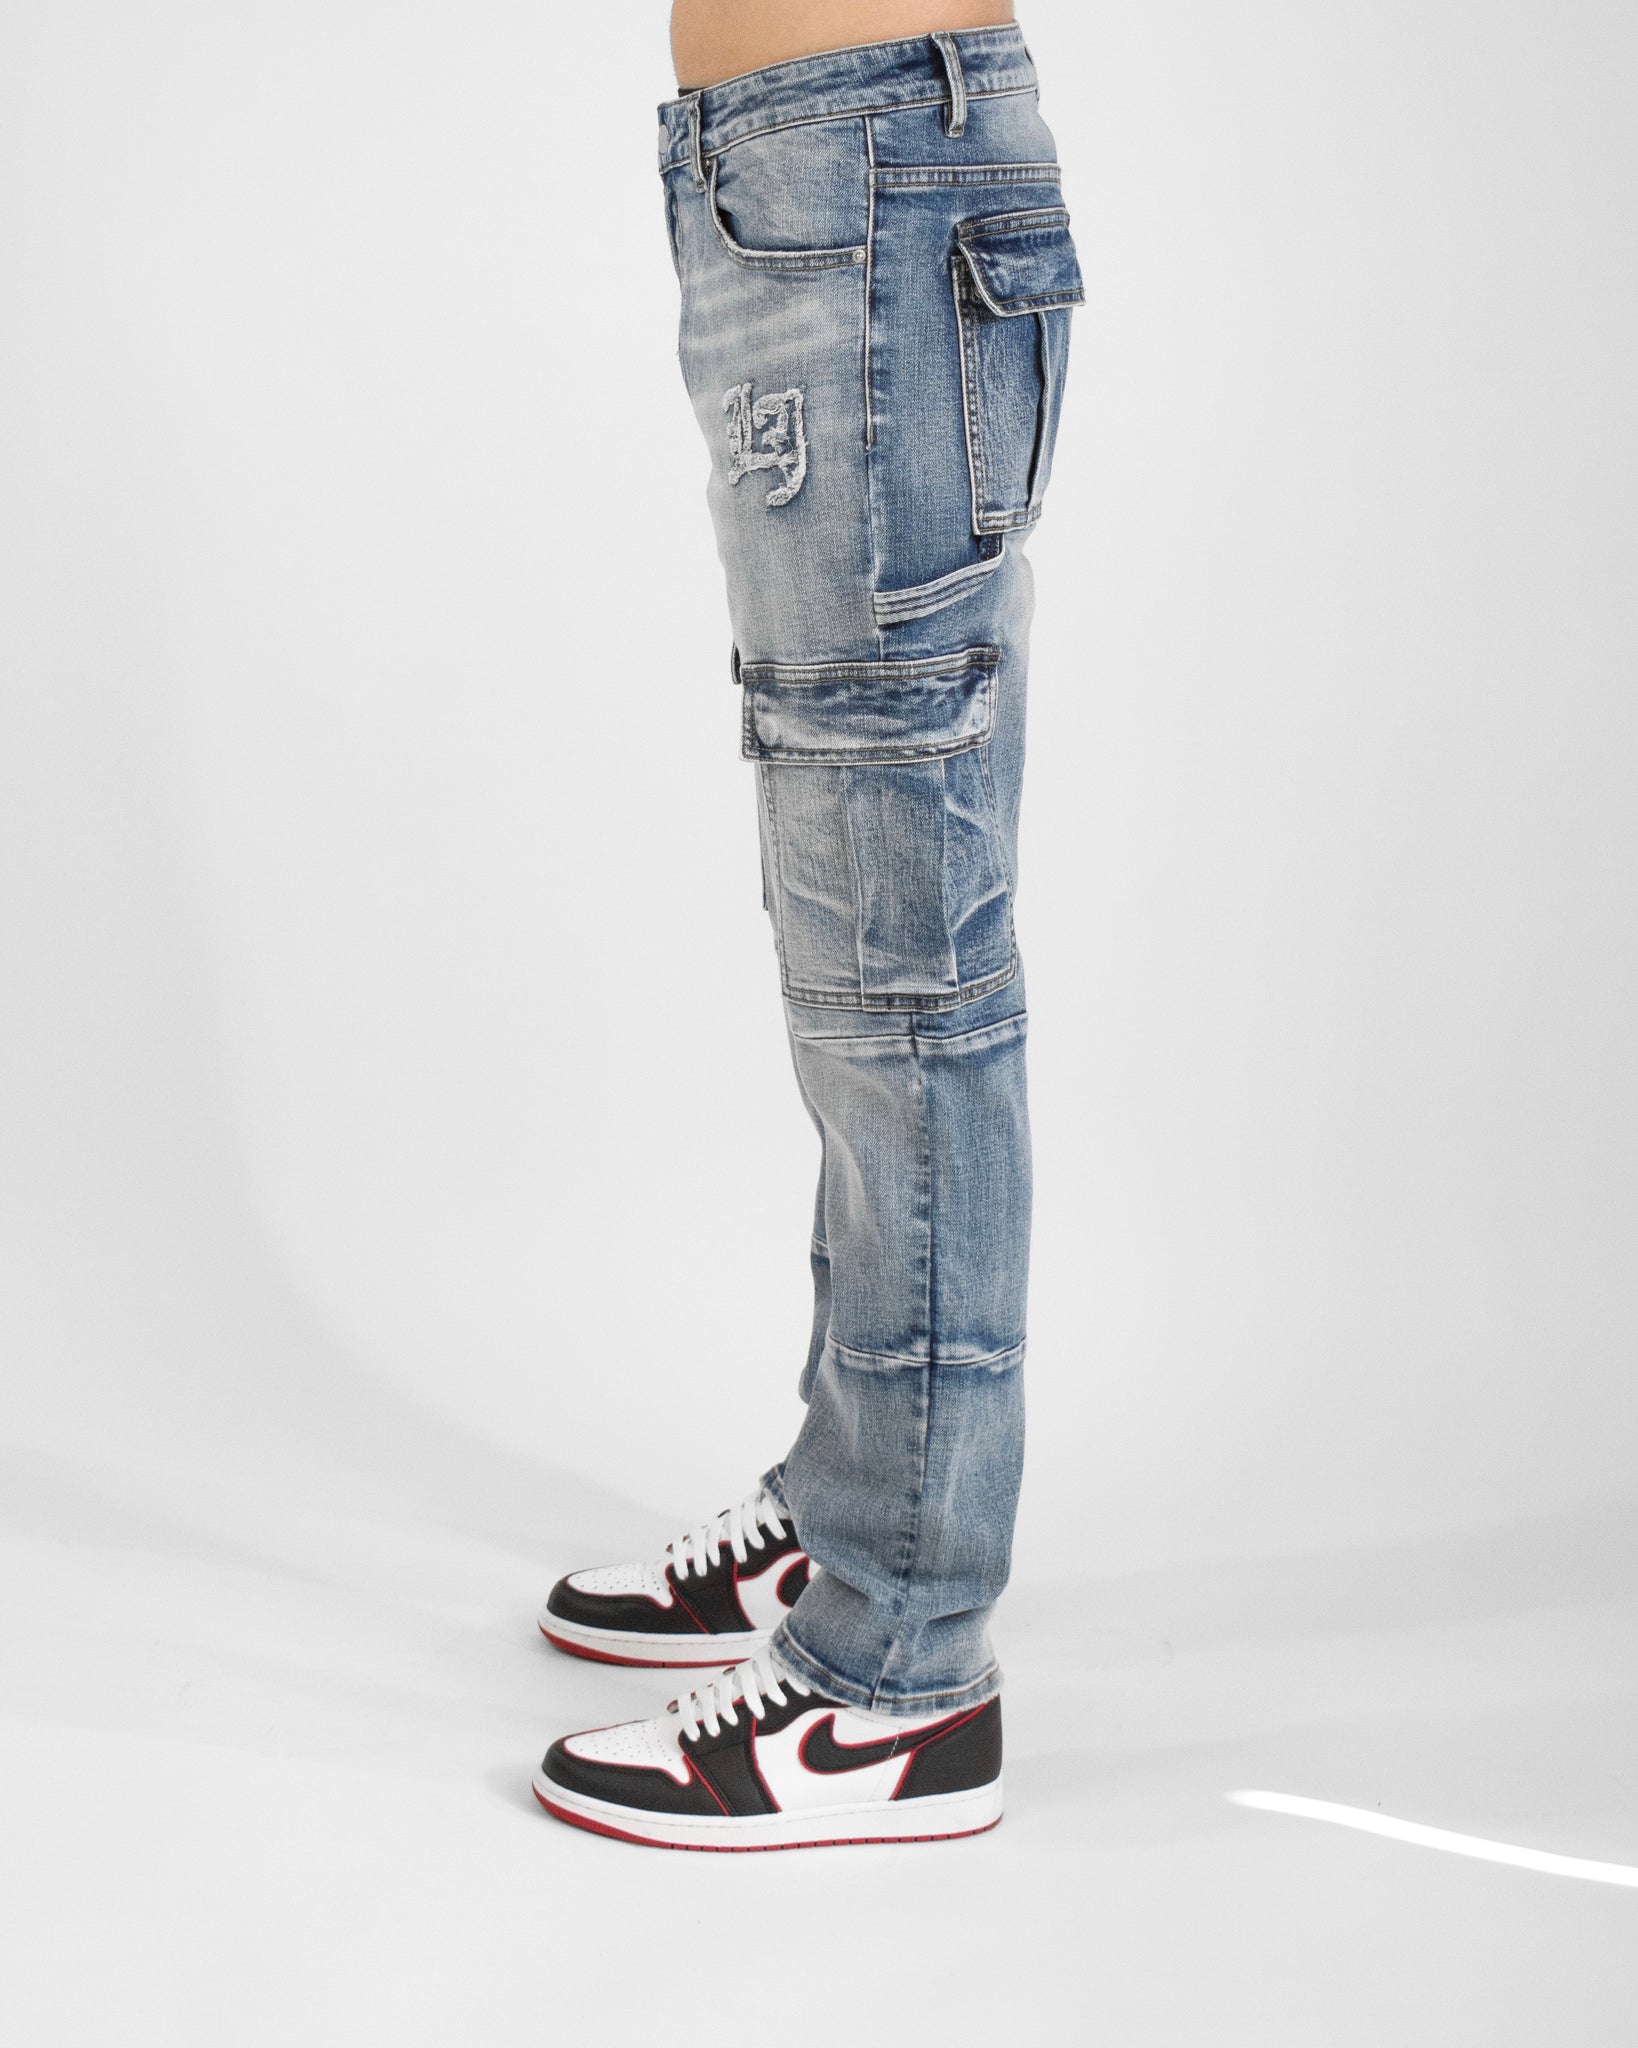 Blue Cargo Jeans – Le Just